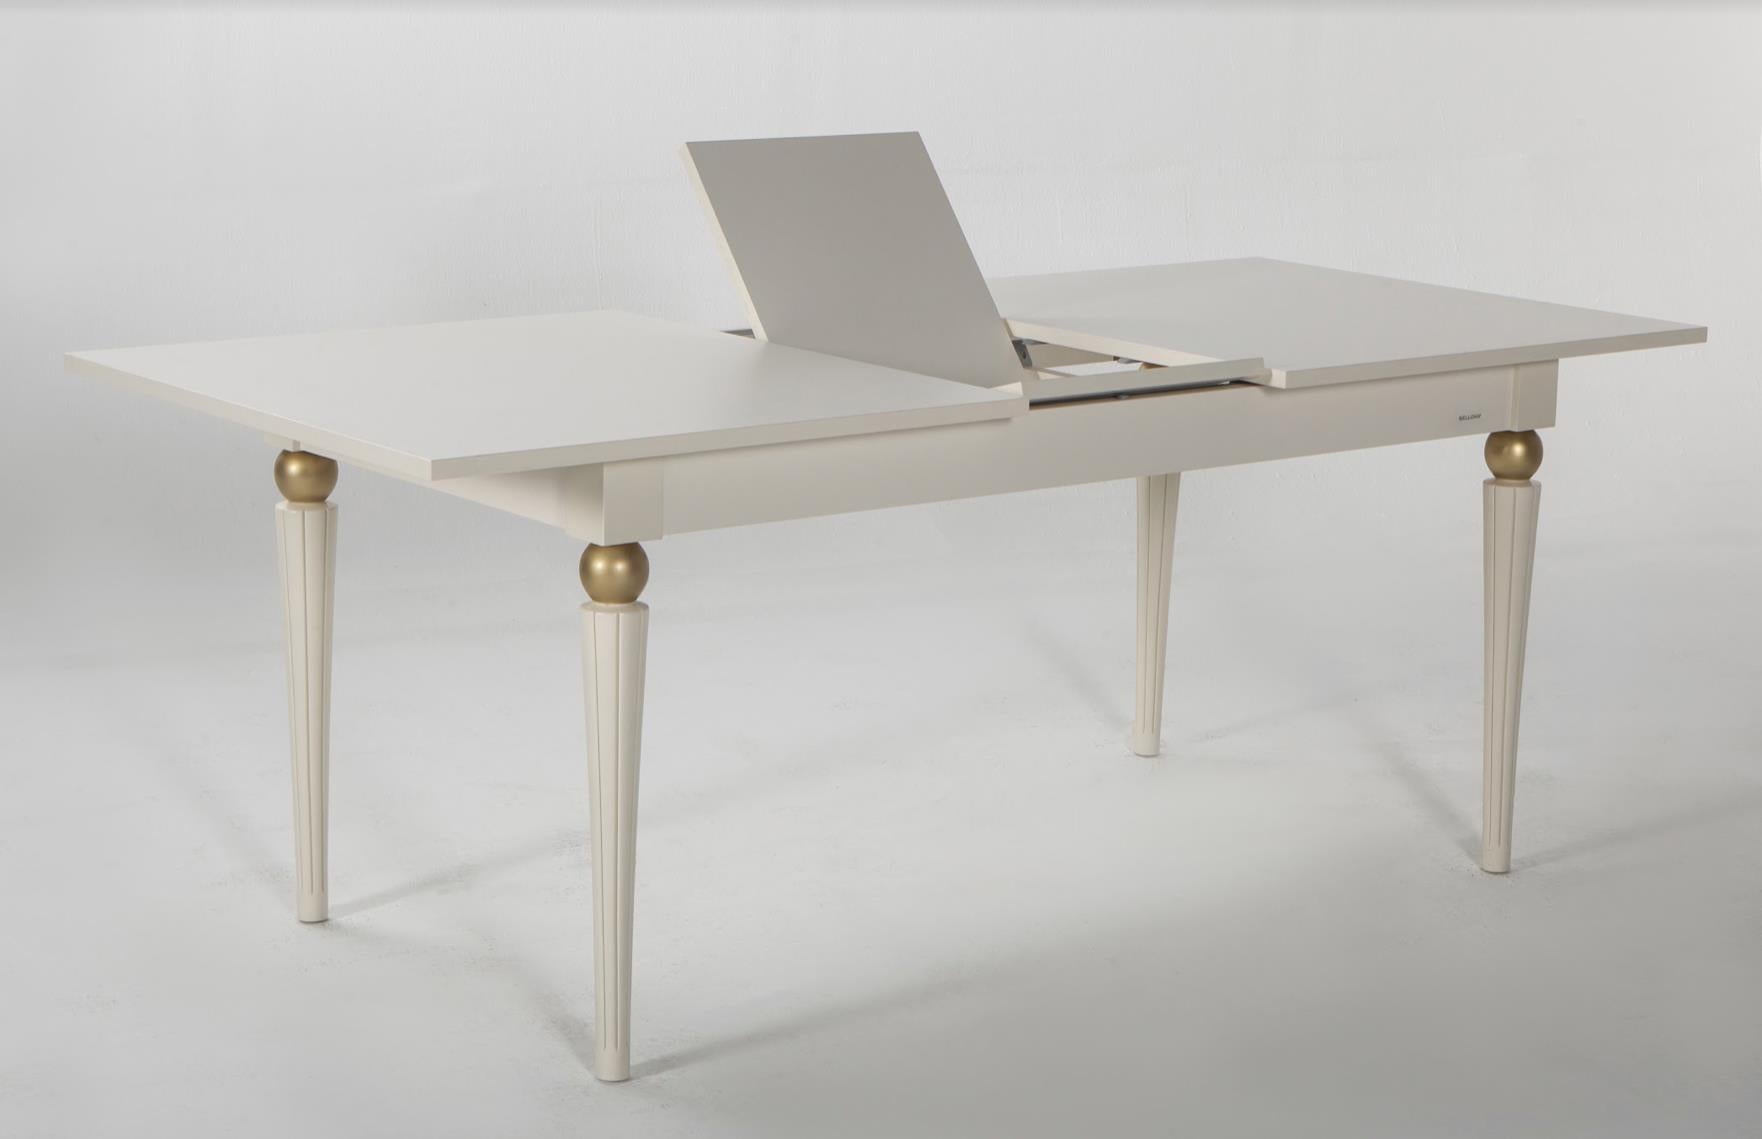 Mistral Dining Table by Bellona